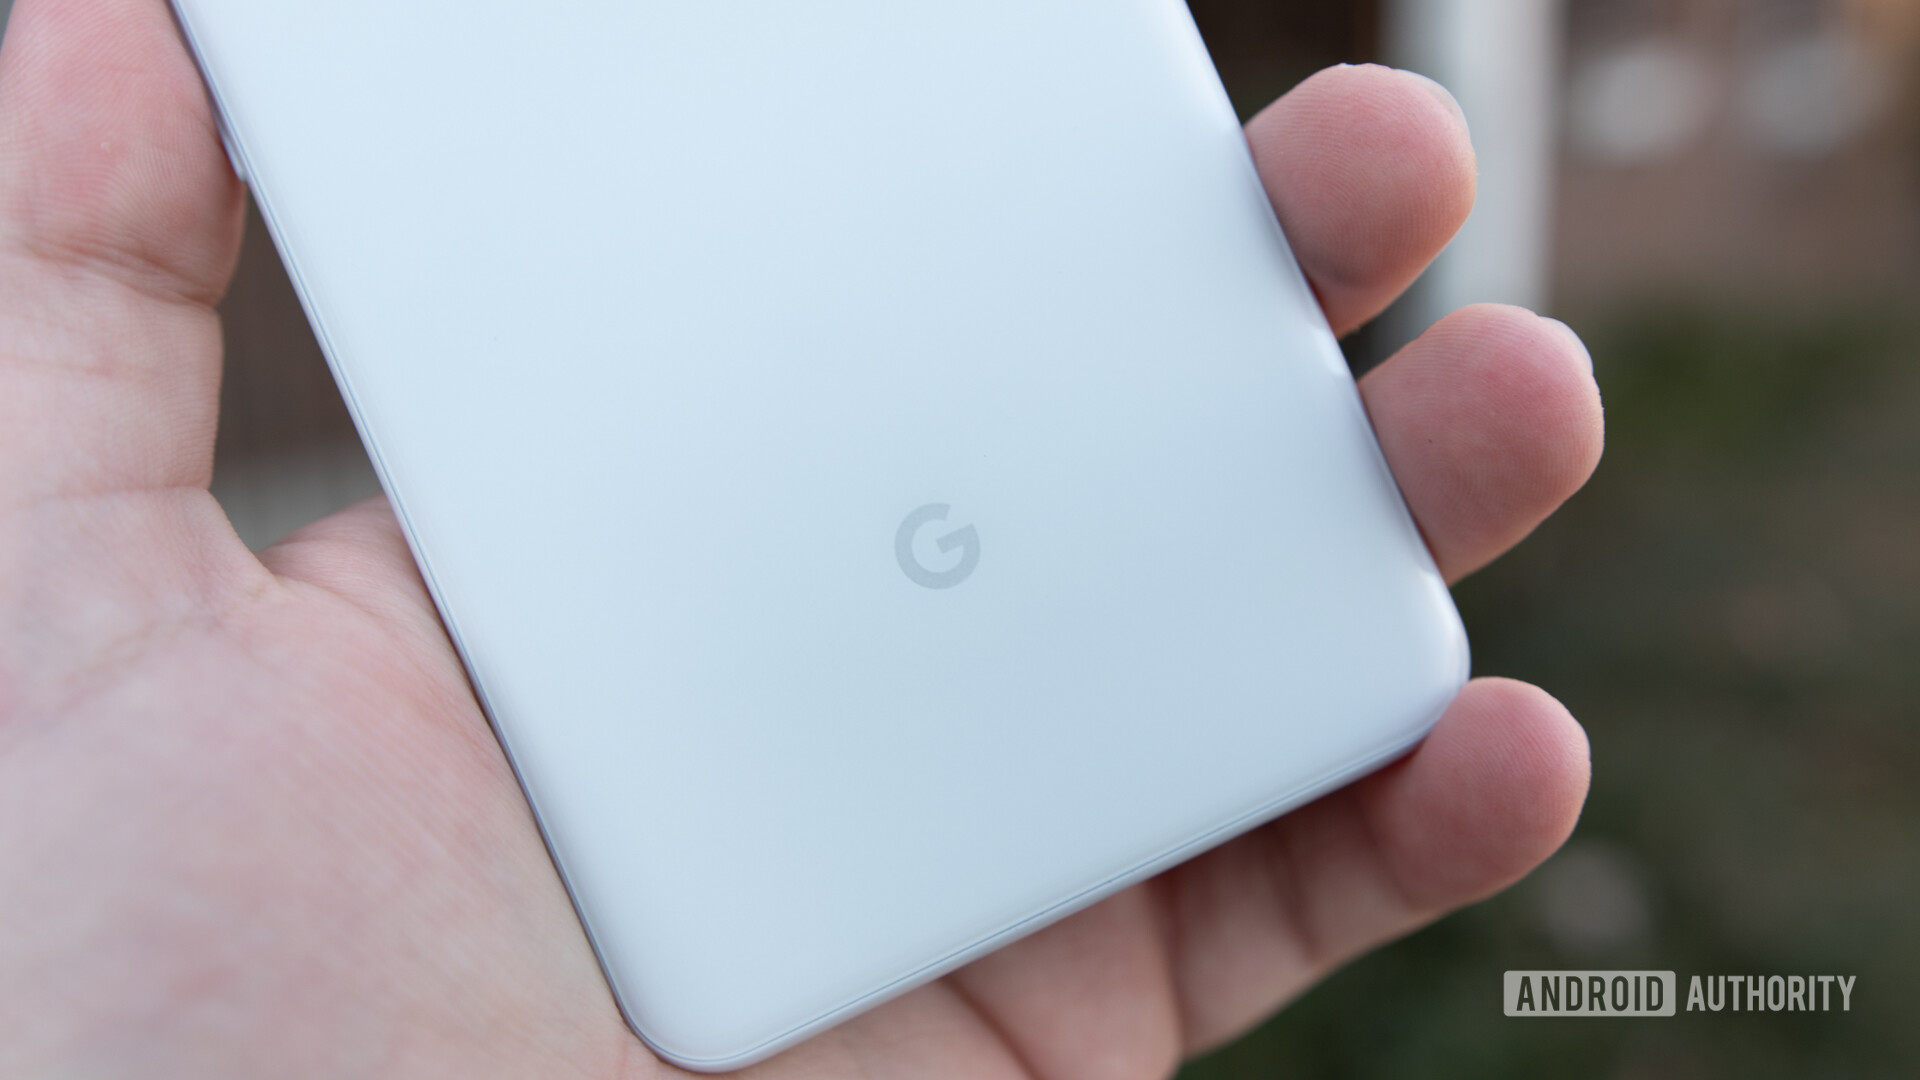 The Google logo on the back of a Google Pixel 3